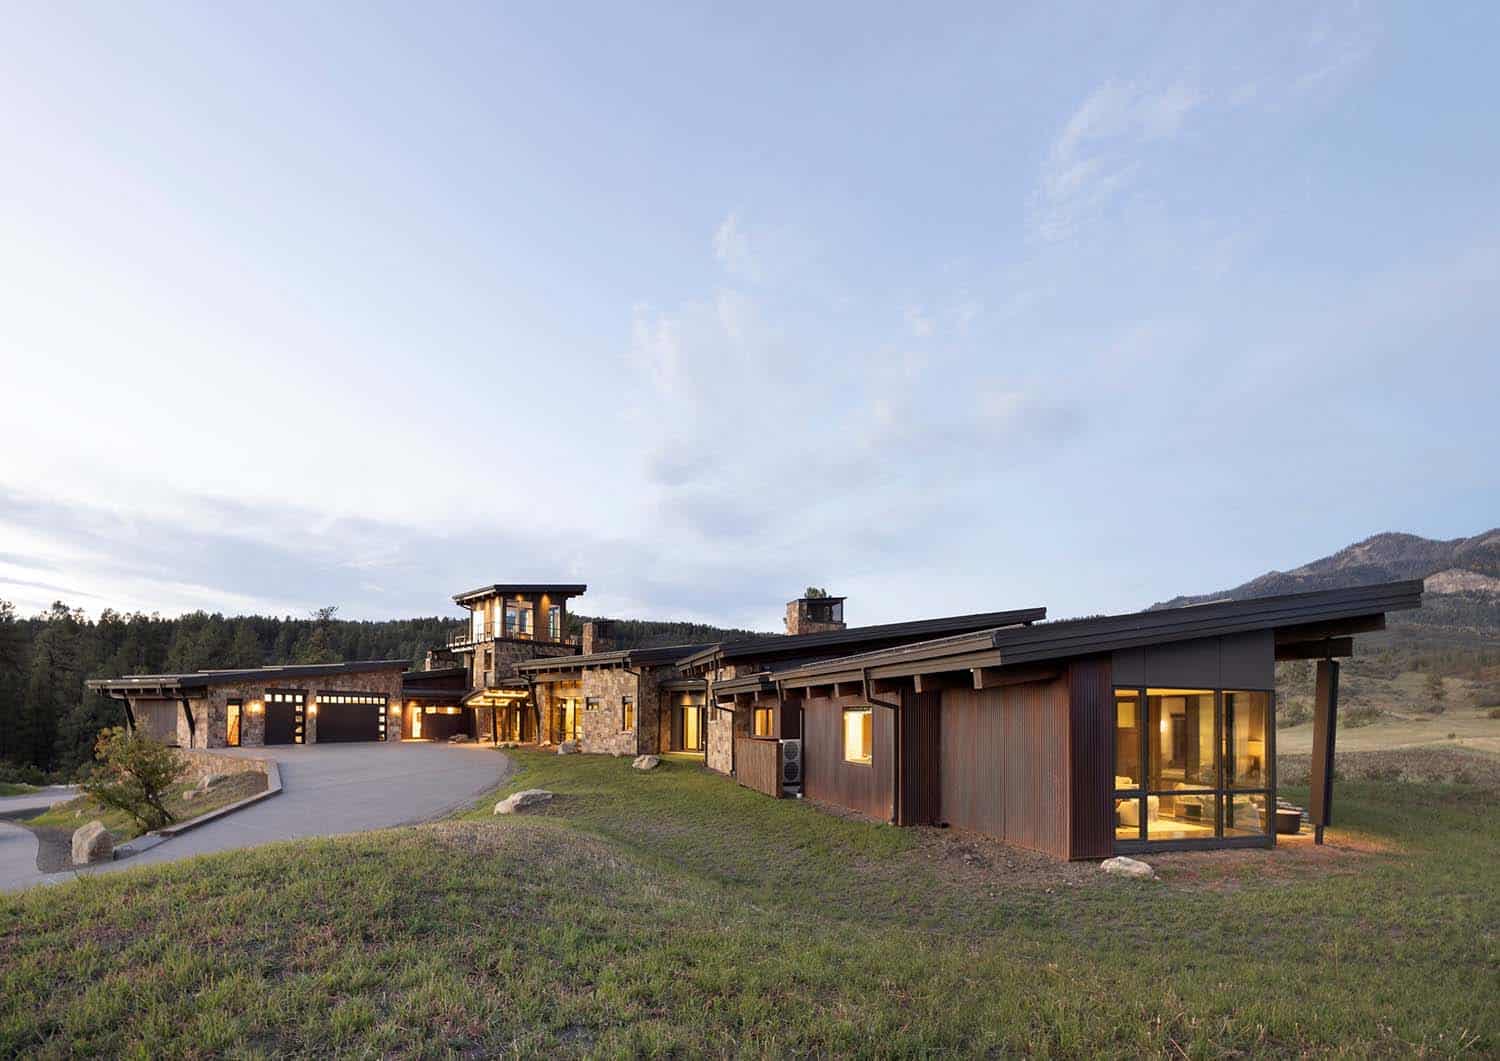 modern rustic ranch house exterior at dusk